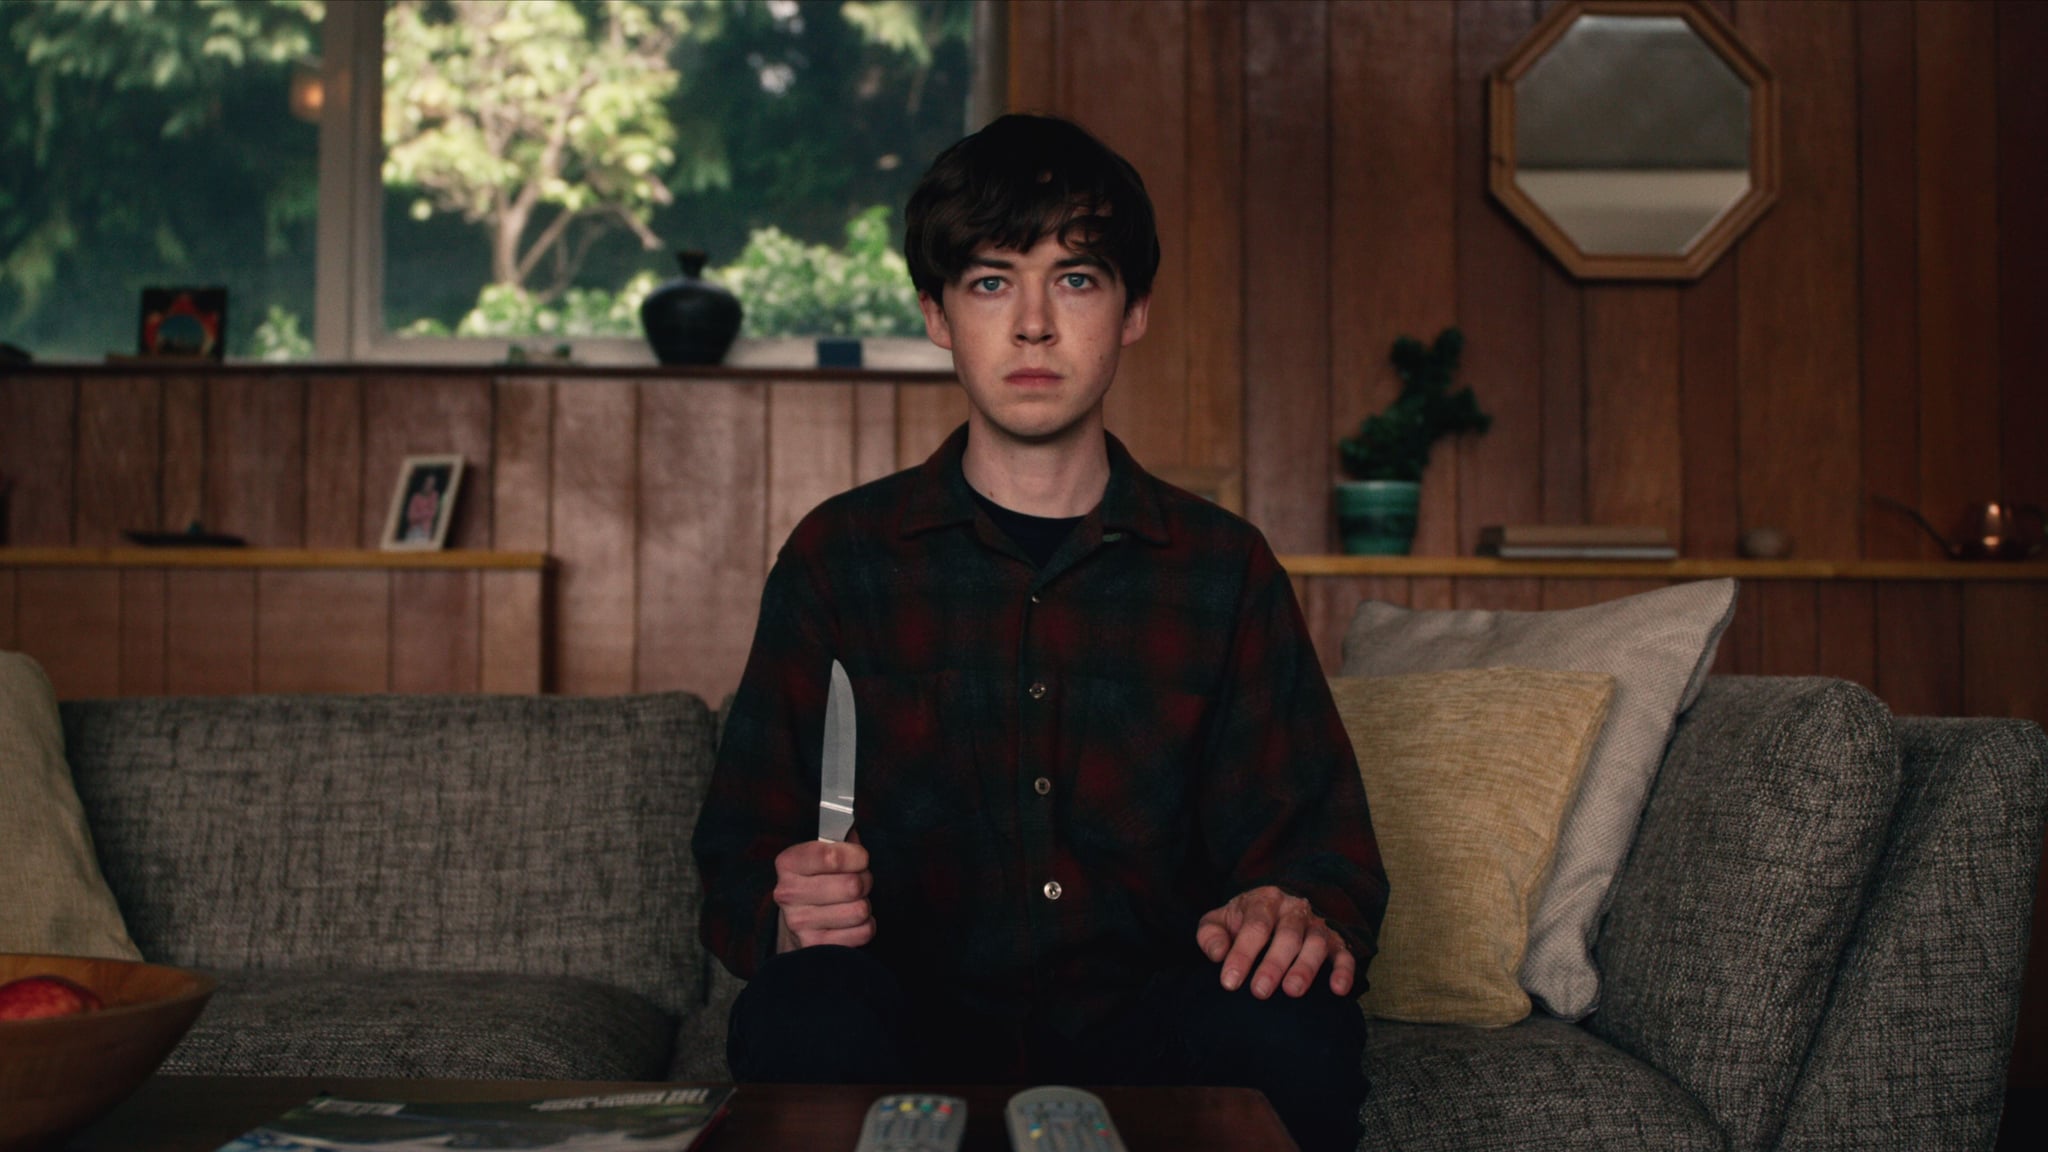 The End Of The F***ing World Season 2 Begins Production